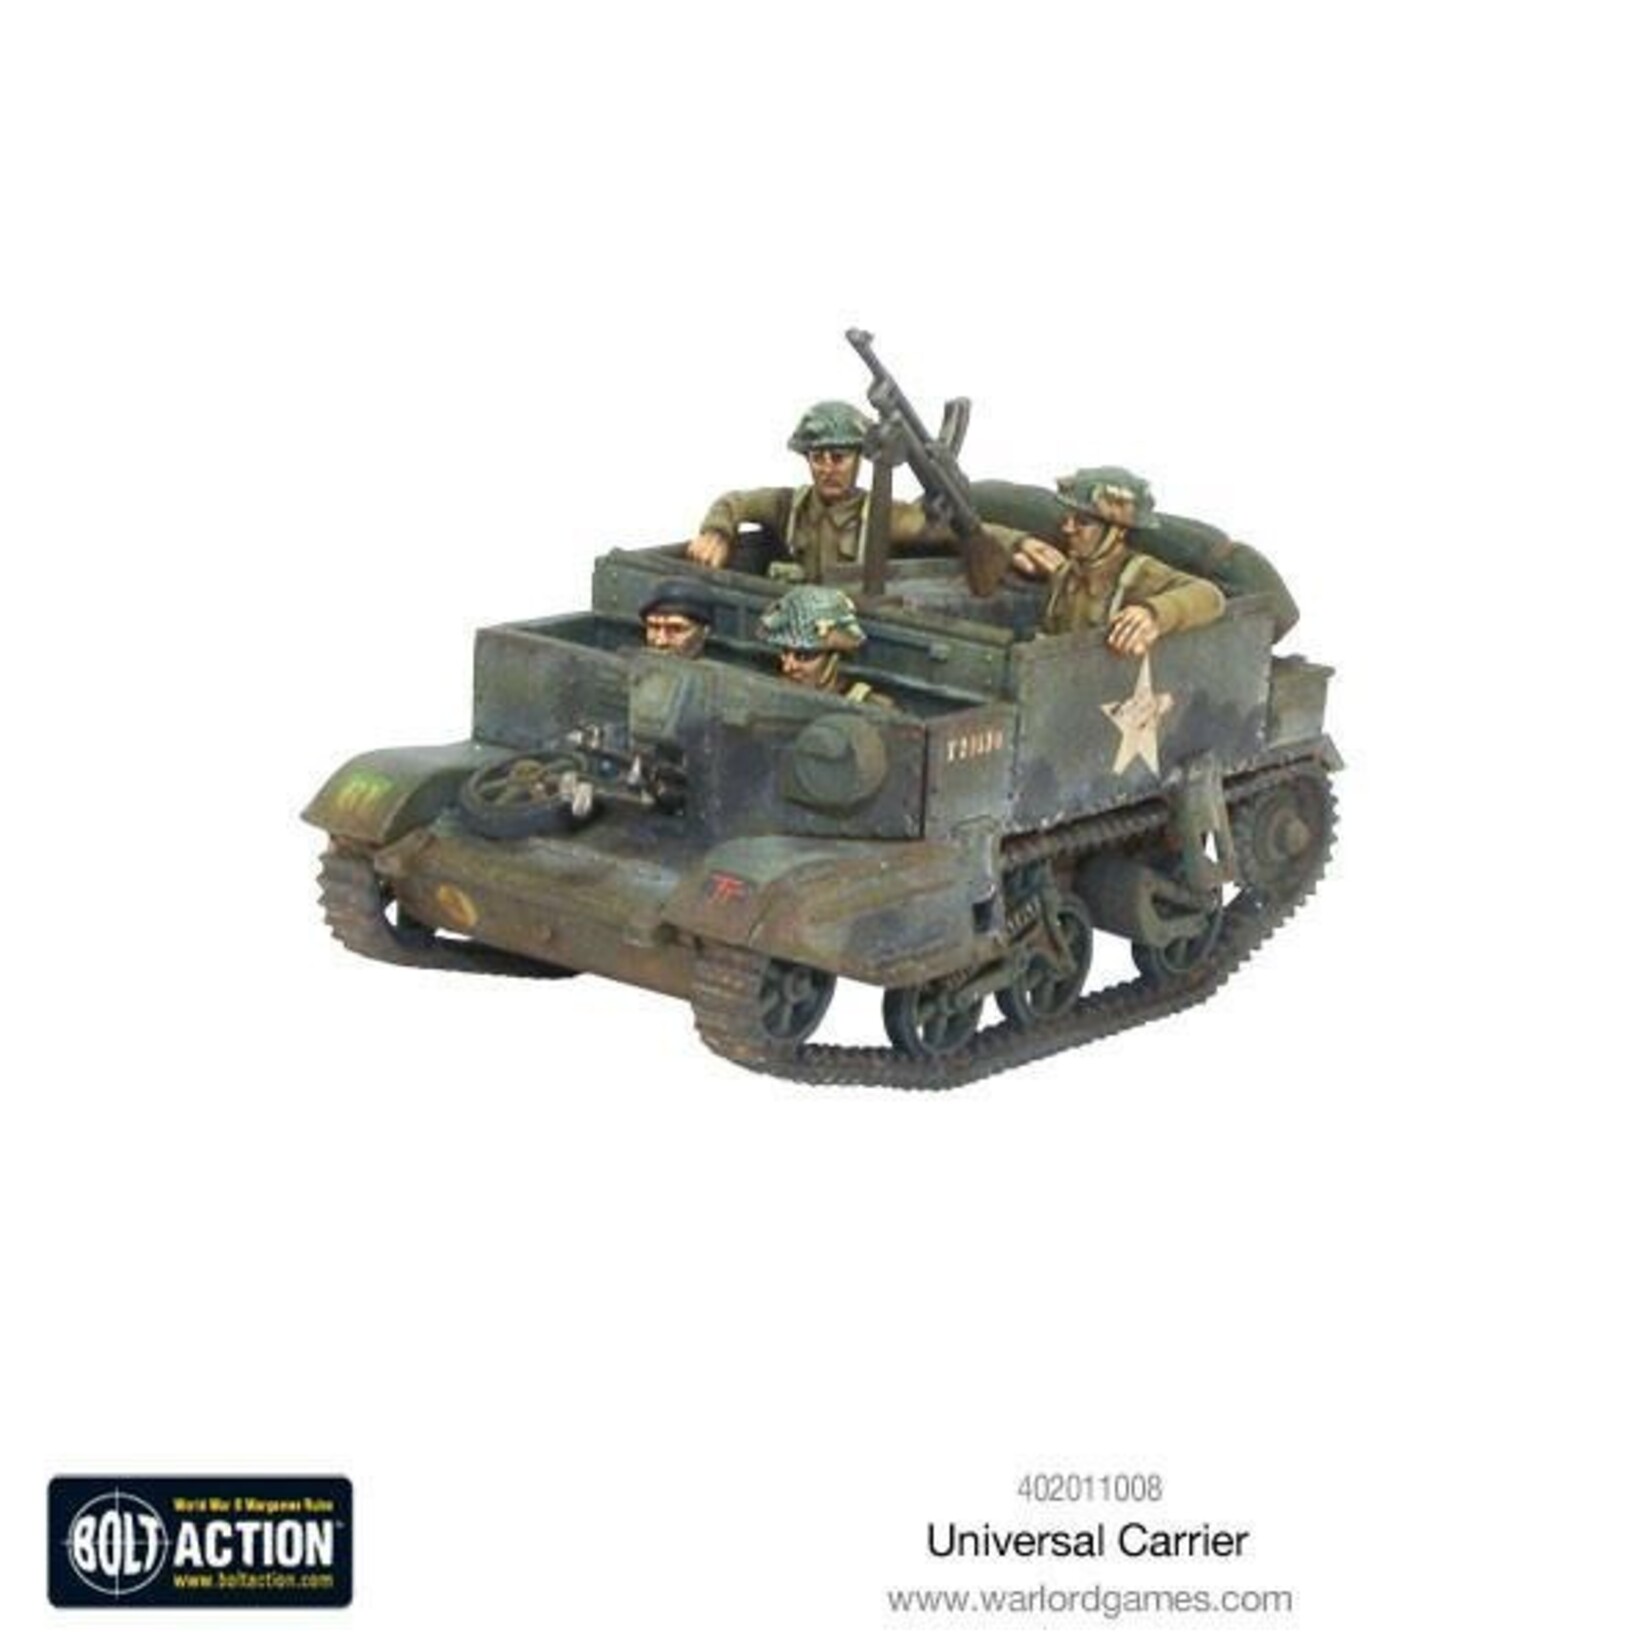 Universal carrier: British army - Bolt action